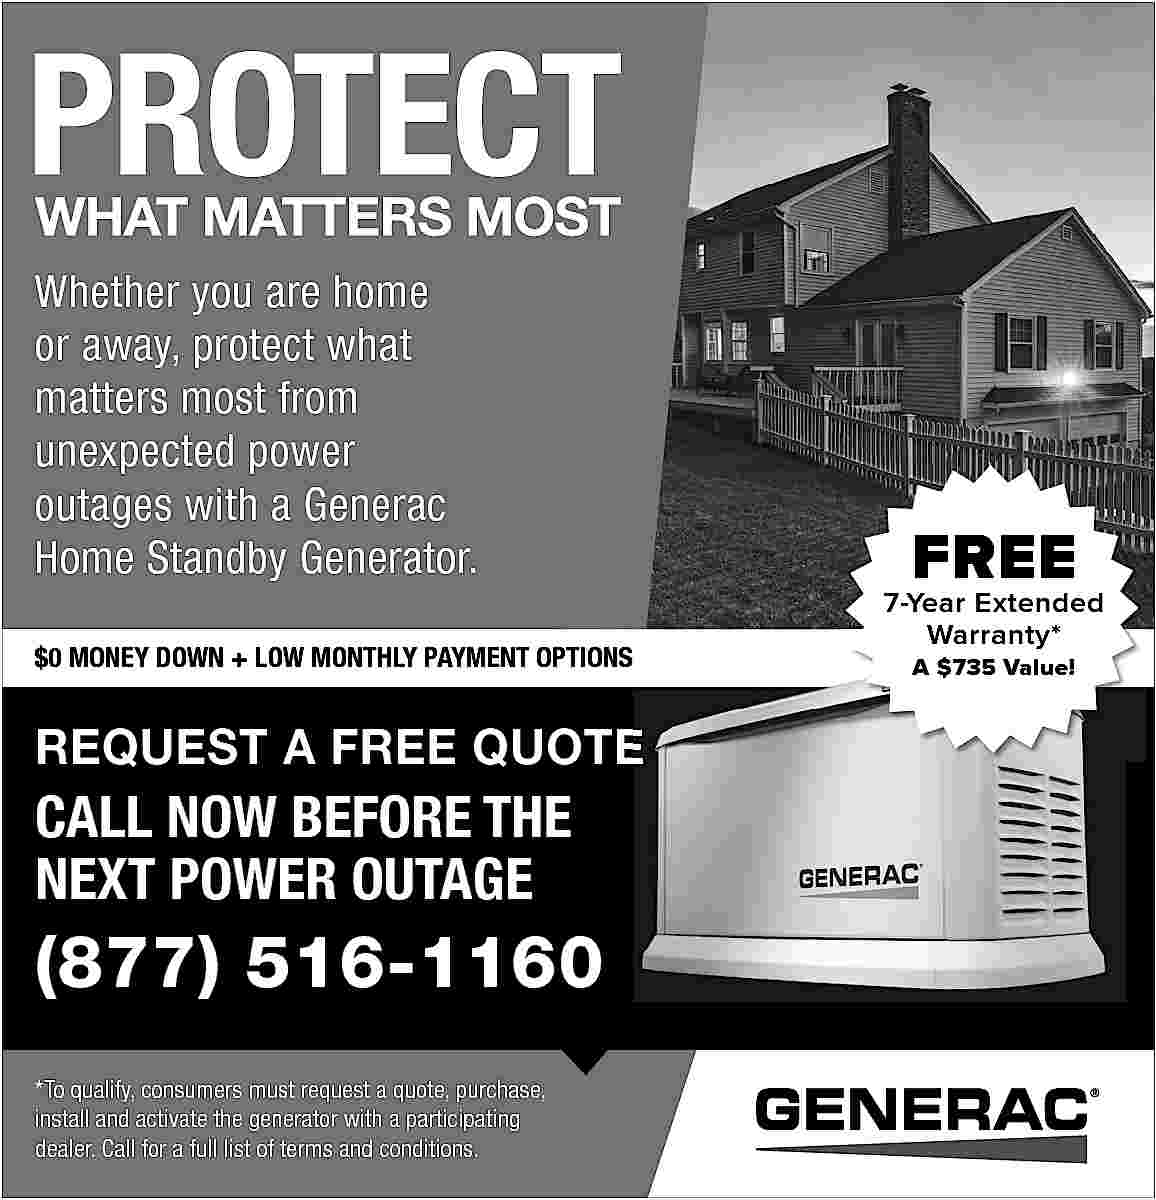 Whether you are home <br>or  Whether you are home  or away, protect what  matters most from  unexpected power  outages with a Generac  Home Standby Generator.  $0 MONEY DOWN + LOW MONTHLY PAYMENT OPTIONS    REQUEST A FREE QUOTE    CALL NOW BEFORE THE  NEXT POWER OUTAGE    (877) 516-1160  *To qualify, consumers must request a quote, purchase,  install and activate the generator with a participating  dealer. Call for a full list of terms and conditions.    FREE    7-Year Extended  Warranty*  A $735 Value!     